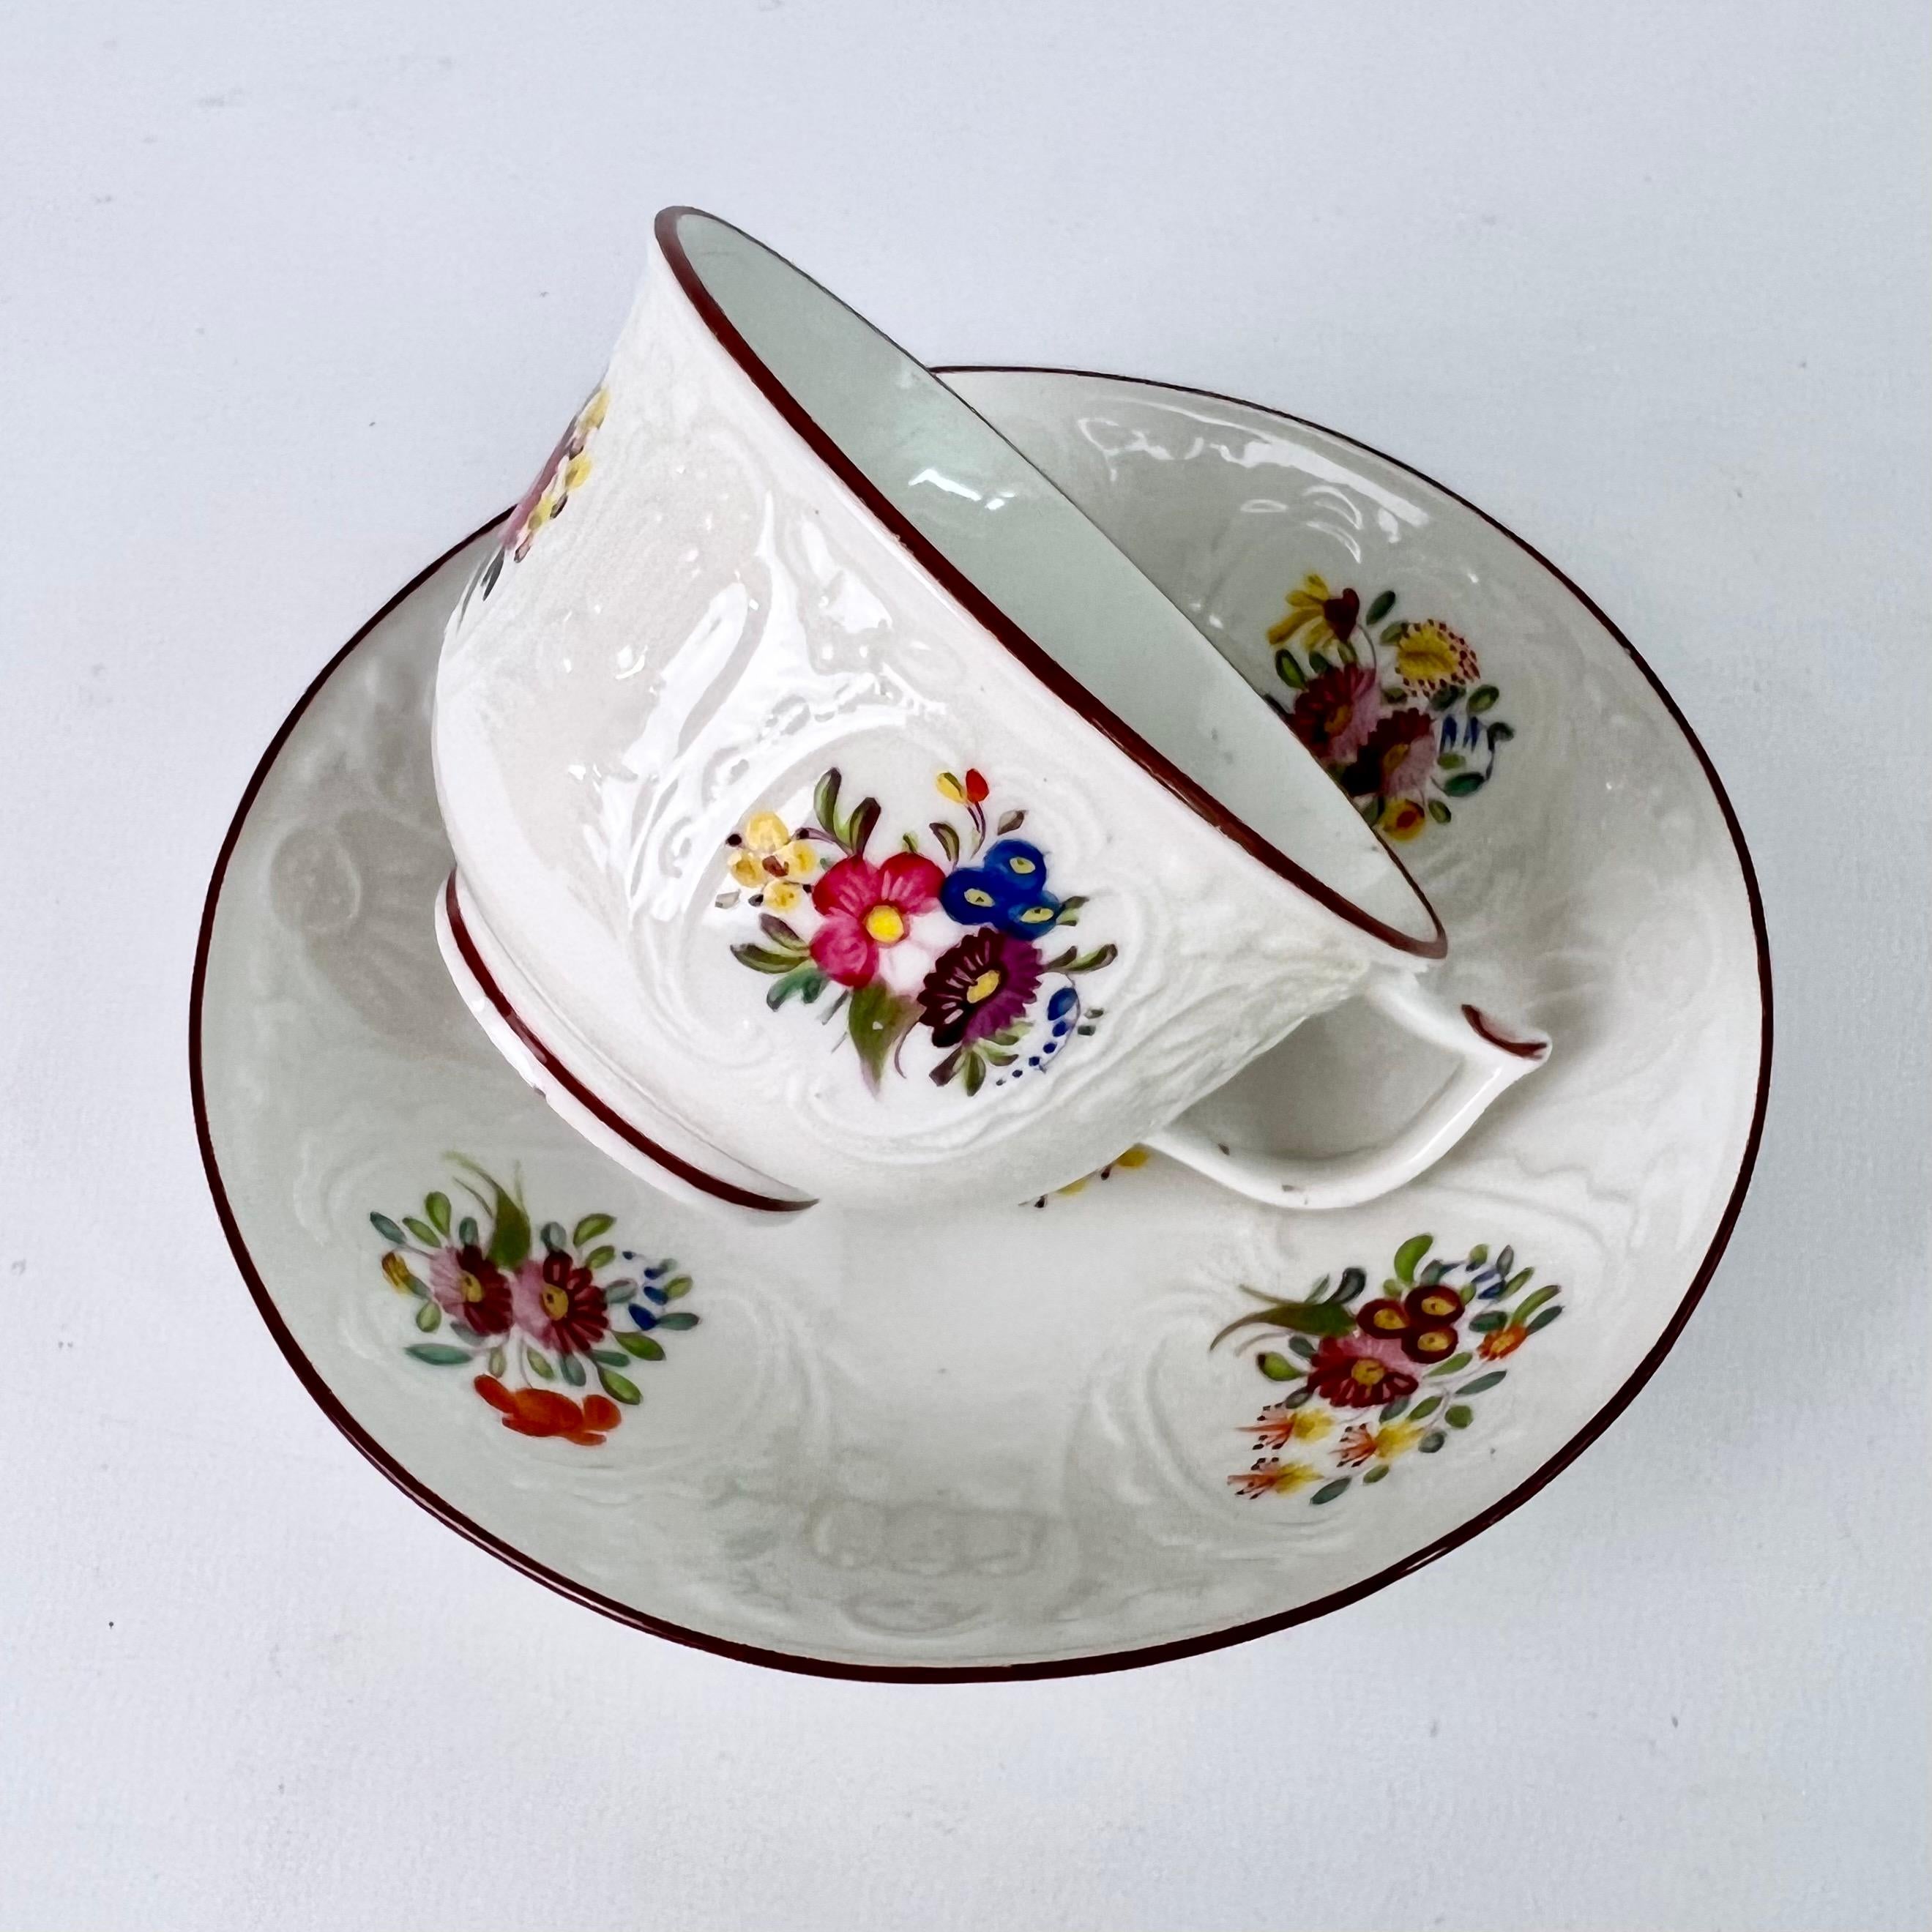 This is a beautiful teacup and saucer made by Coalport in about 1817. The teacup is blind-moulded in the 